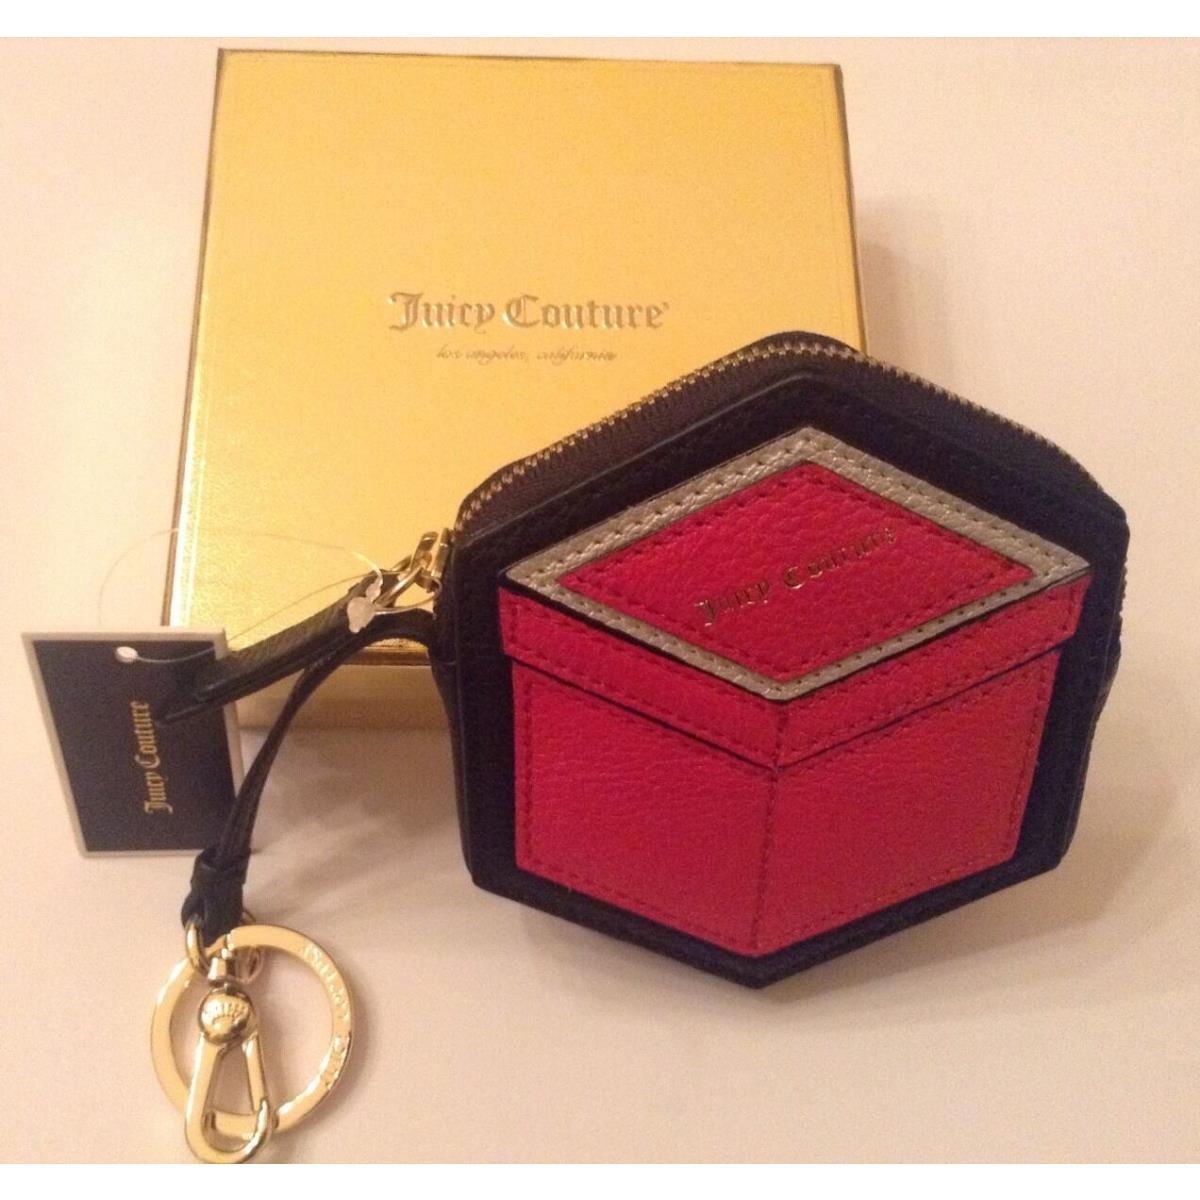 Juicy Couture Leather Hollywood Hills Co Purse W/ Key Chain Gift Box